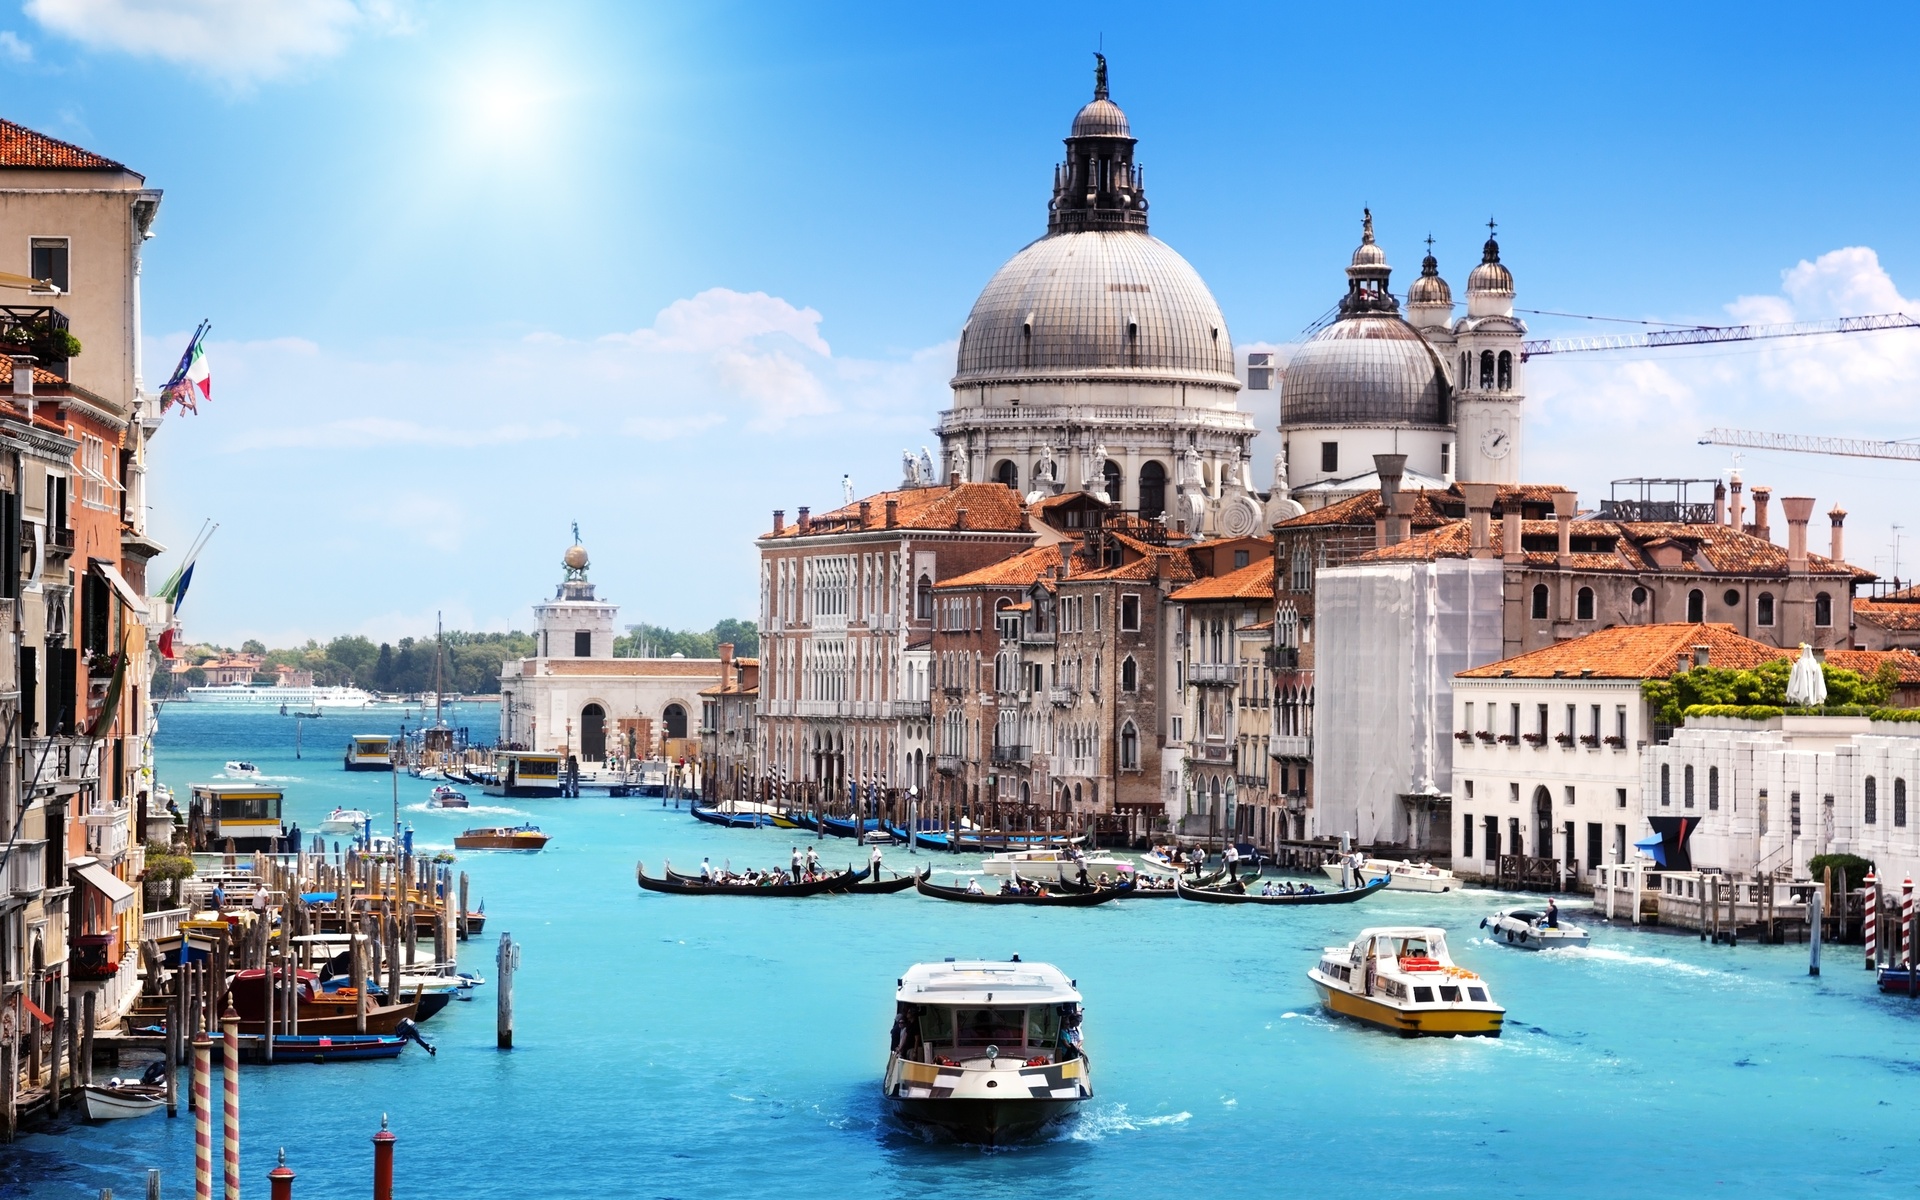 venice, Italy, Places, Architecture, Buildings, Scenic, Rivers, Canals, Boats Wallpaper